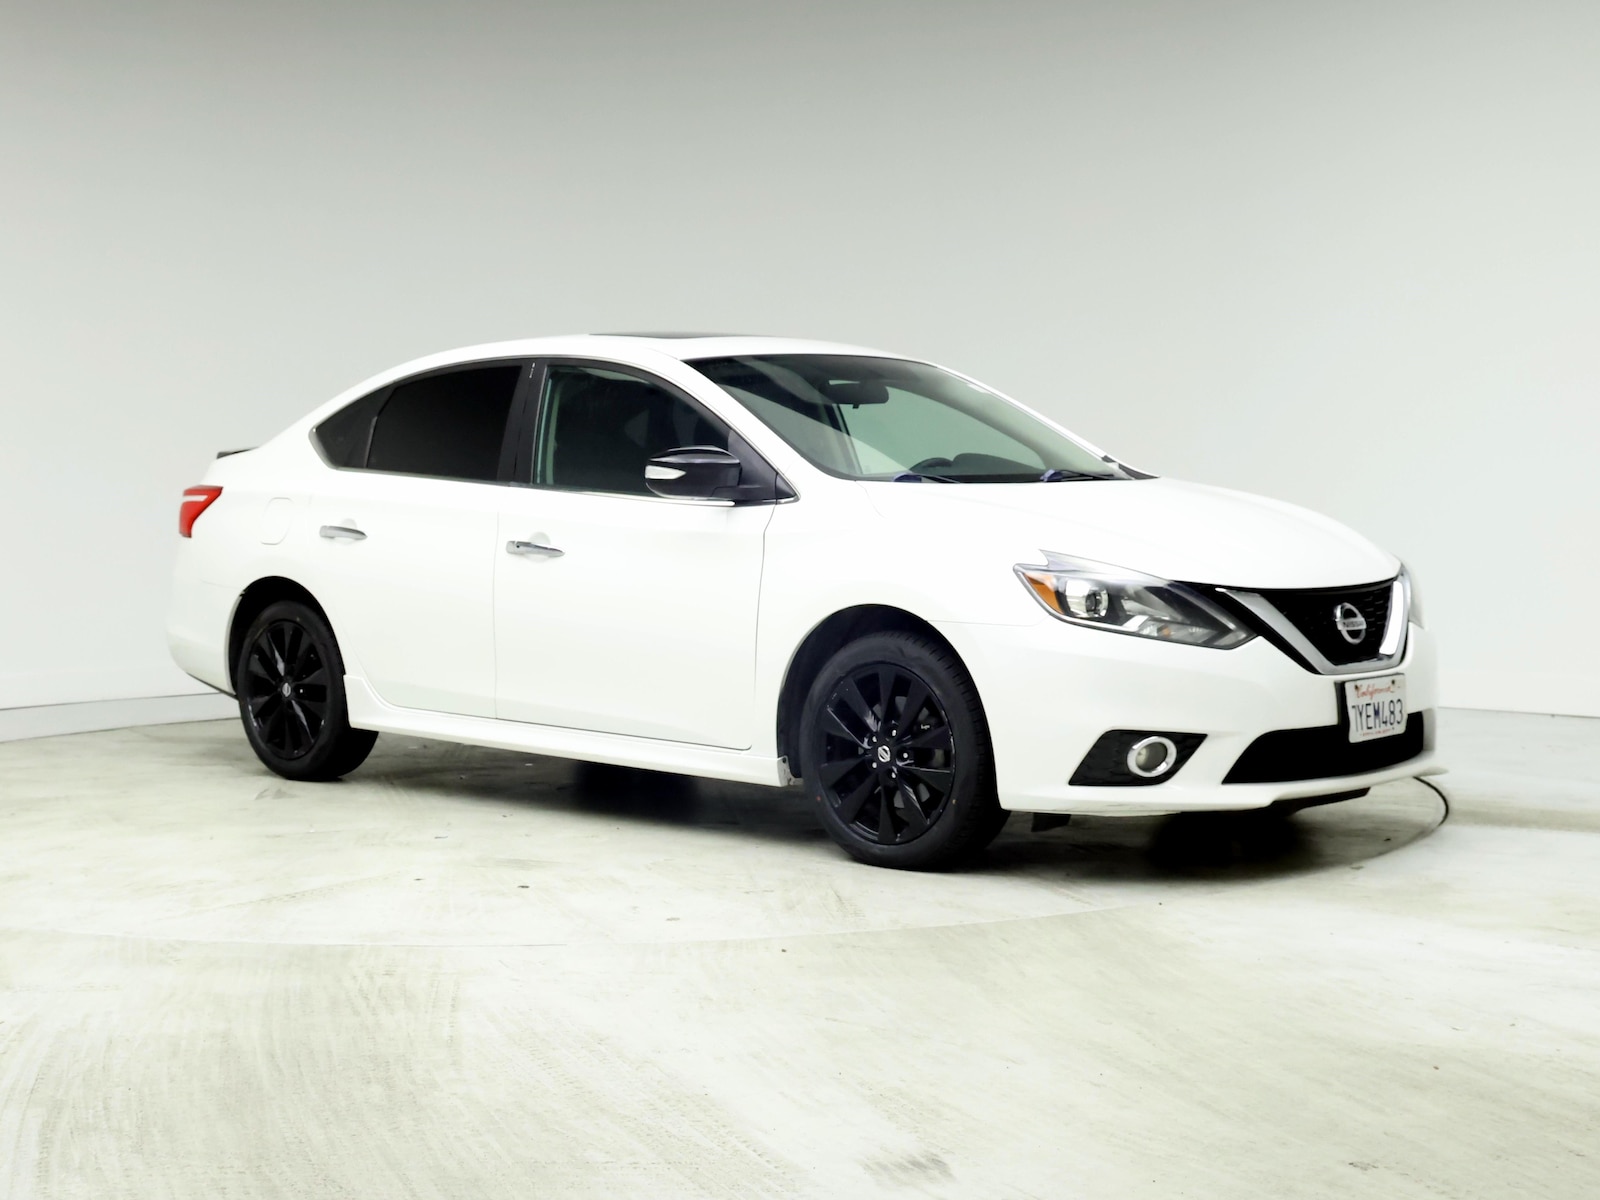 Used 2017 Nissan Sentra Nismo with VIN 3N1CB7AP6HY262900 for sale in Kenosha, WI